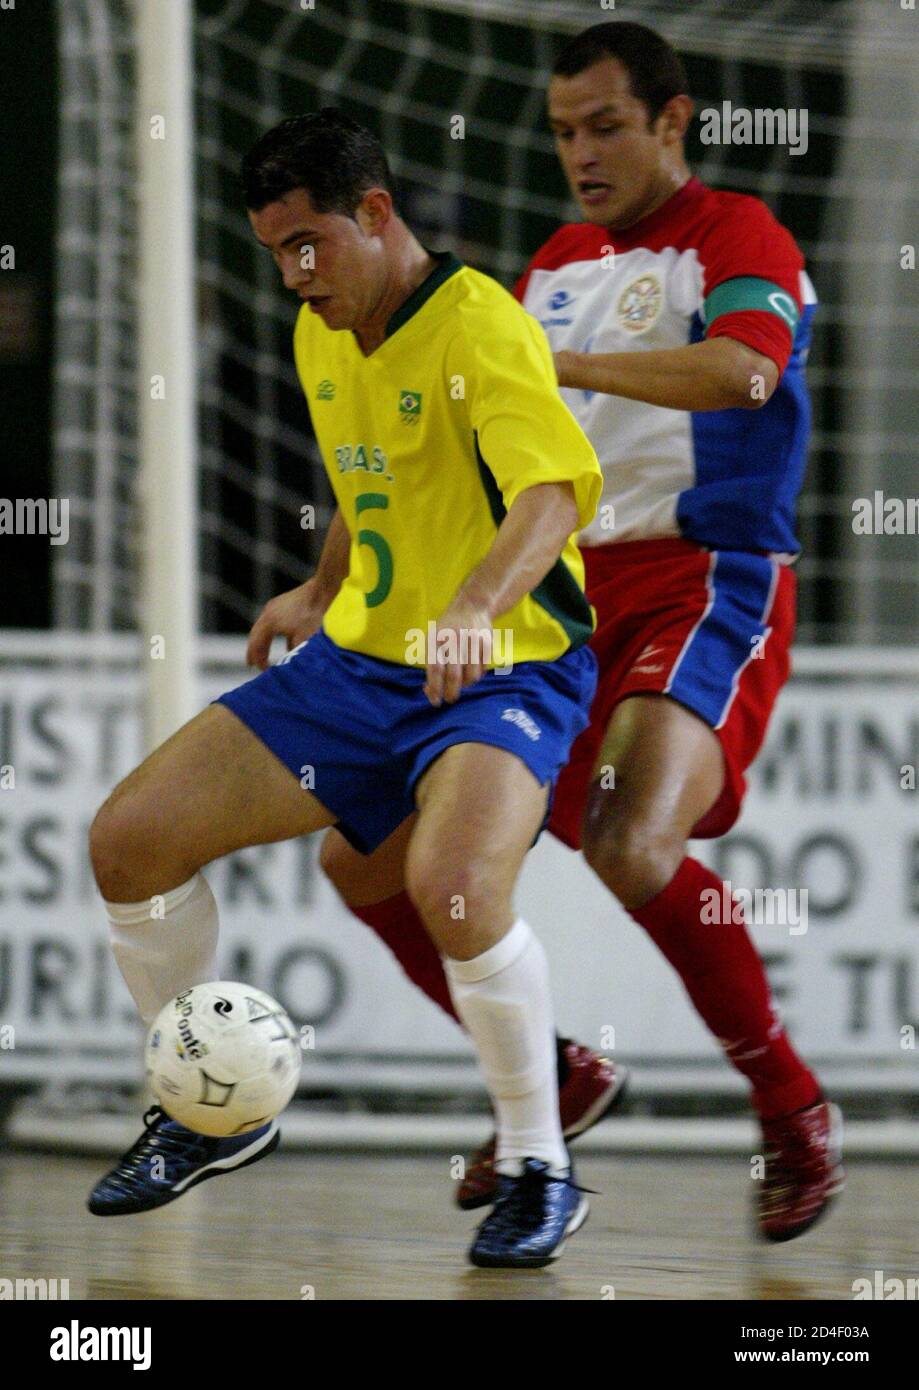 Vinicius Texeira (L) from Brazil fights for the ball with Gustavo Franco from Paraguay during a five-man indoor soccer match at the VII South American Games in Rio de Janeiro, August 7, 2002. REUTERS/Sergio Moraes  SM/SV Stock Photo